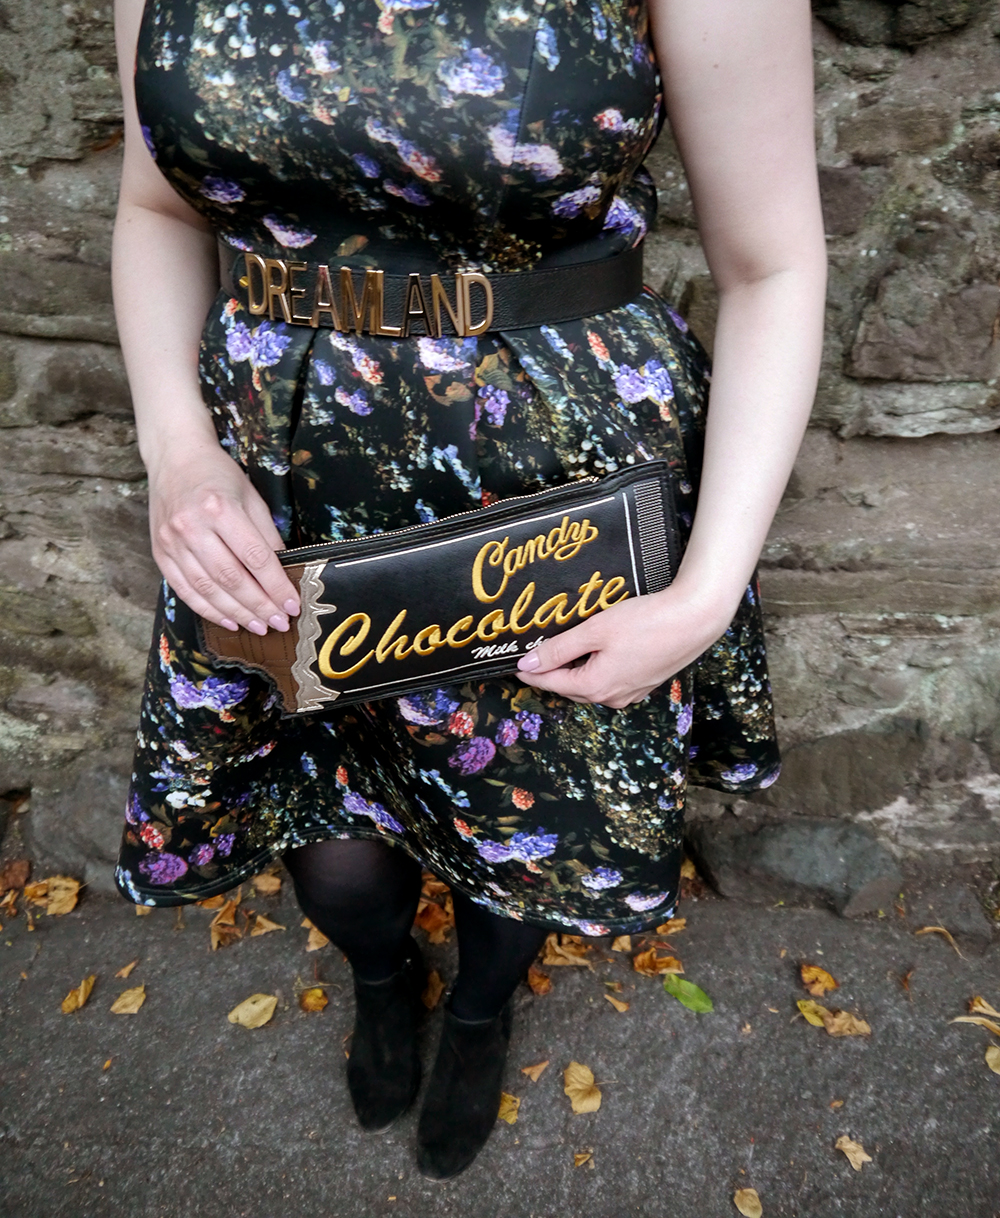 Dreamland belt, Moschino, candyfloss hair, evening style for autumn, style blogger, scottish blogger, Dundee Wearable Art 2015, novelty New Look bag, #scotstreetstyle